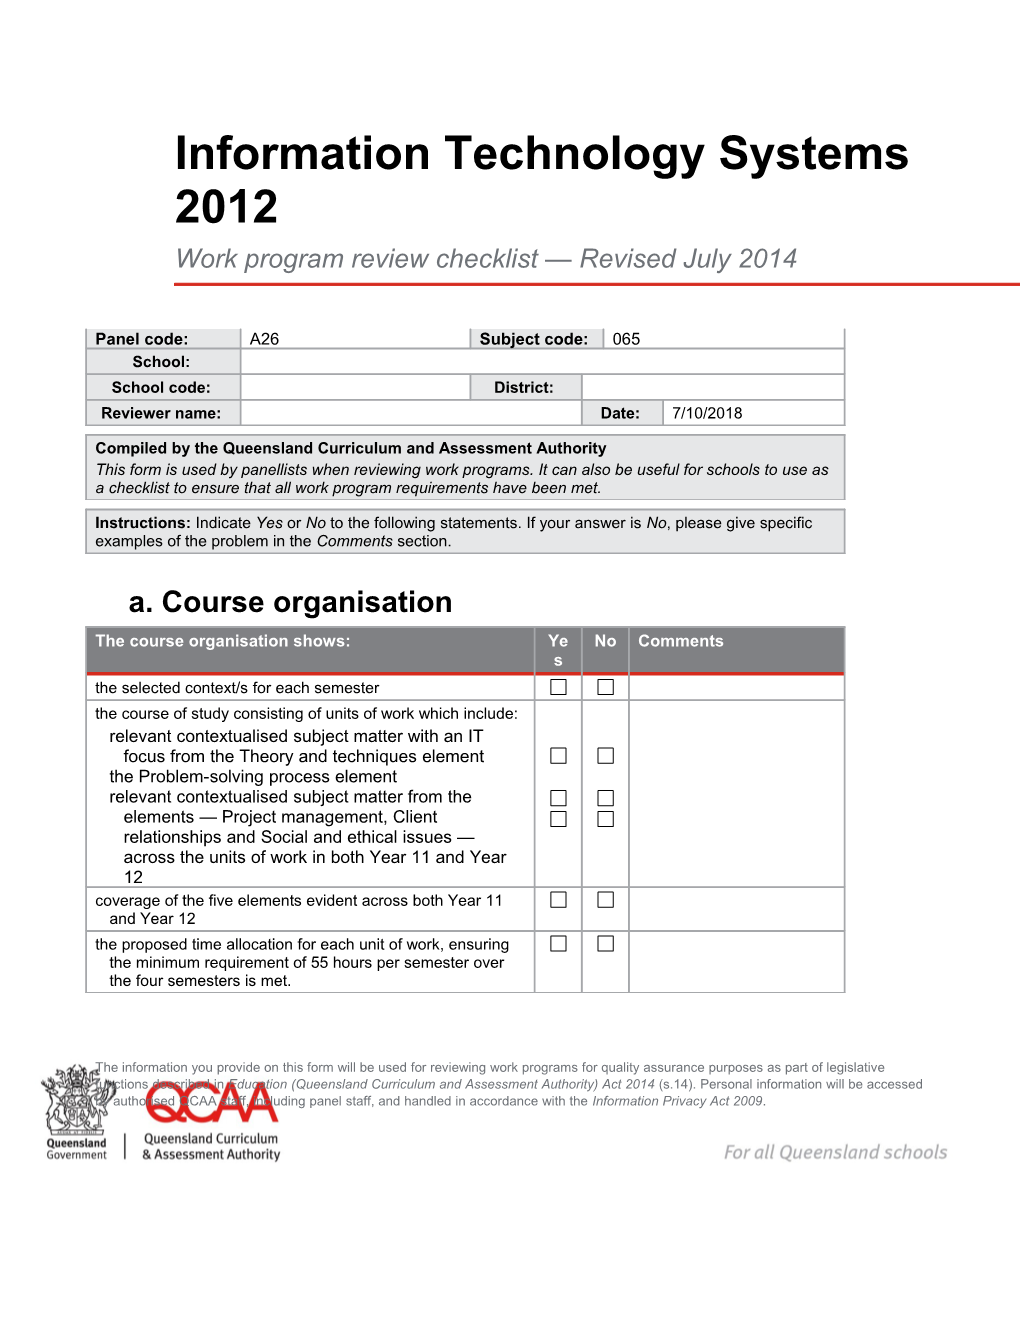 Information Technology Systems (2012) Work Program Review Checklist